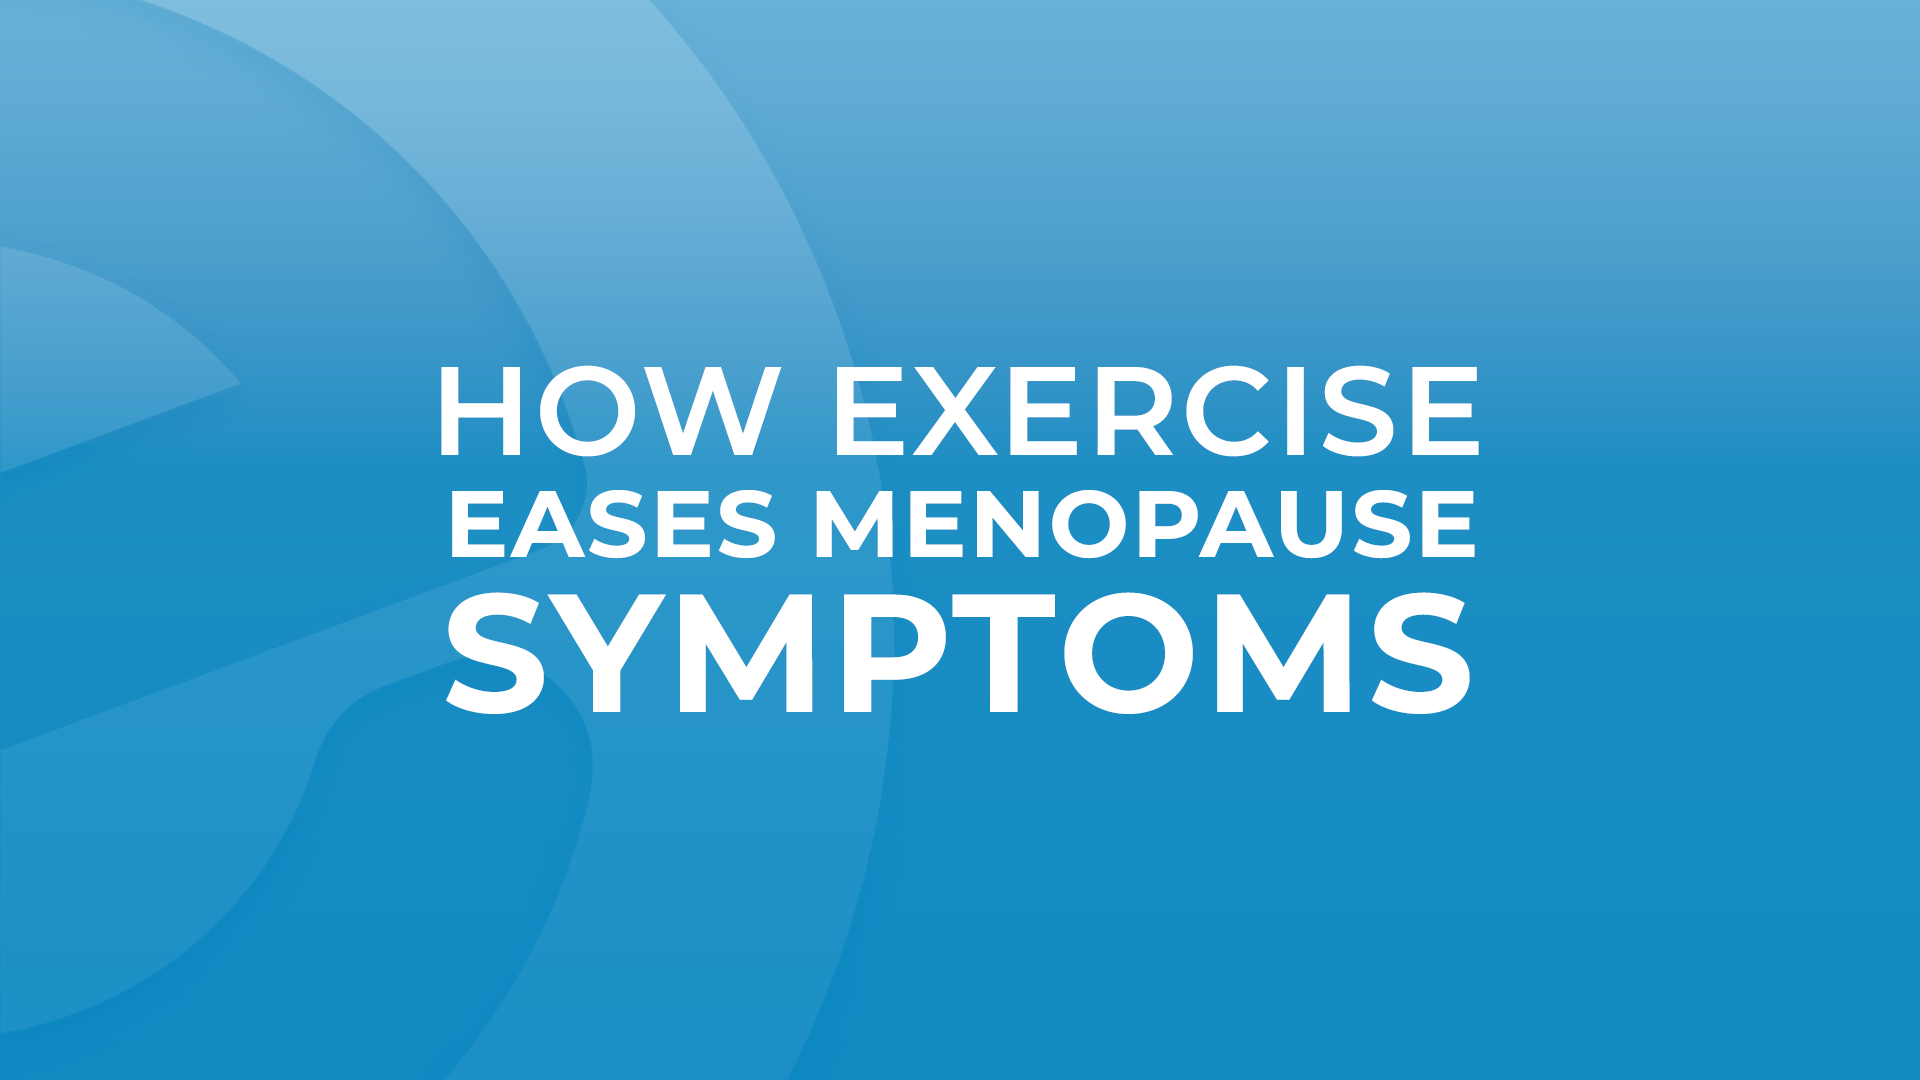 How Exercise Eases Menopause Symptoms